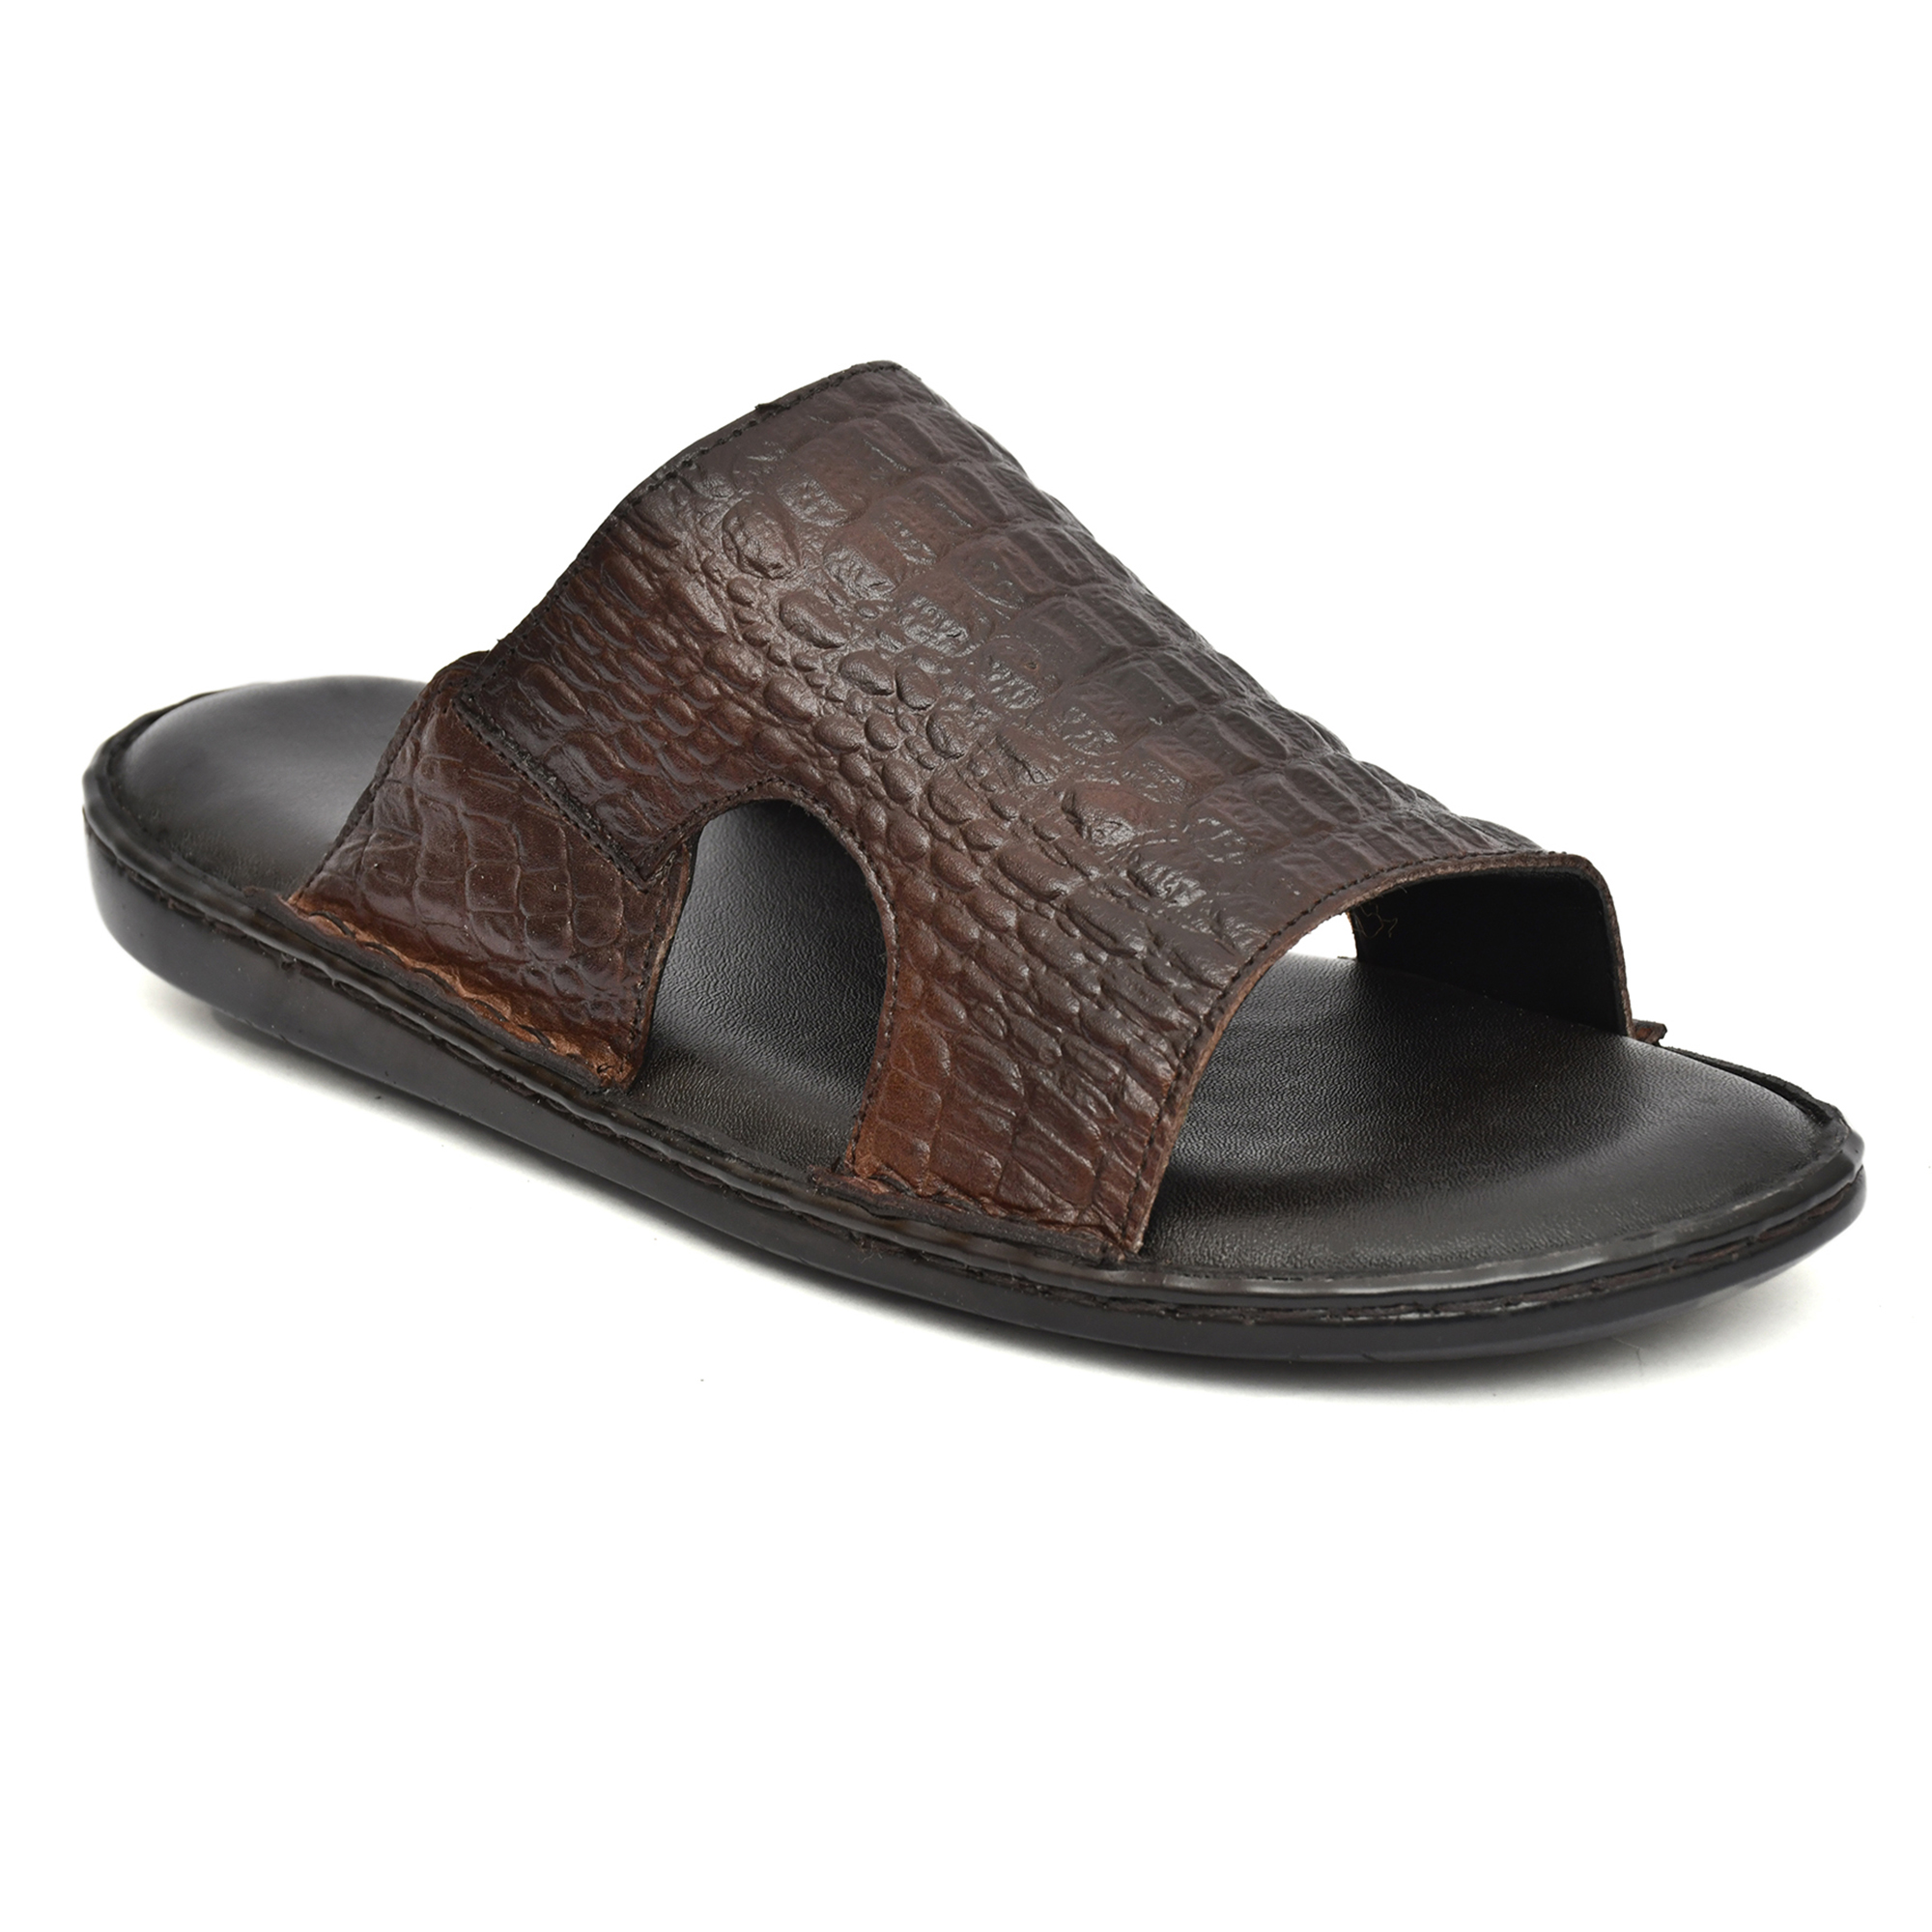 Brown Crocodile Embossed Leather Slippers for Men with Memory foam footpad by asm.